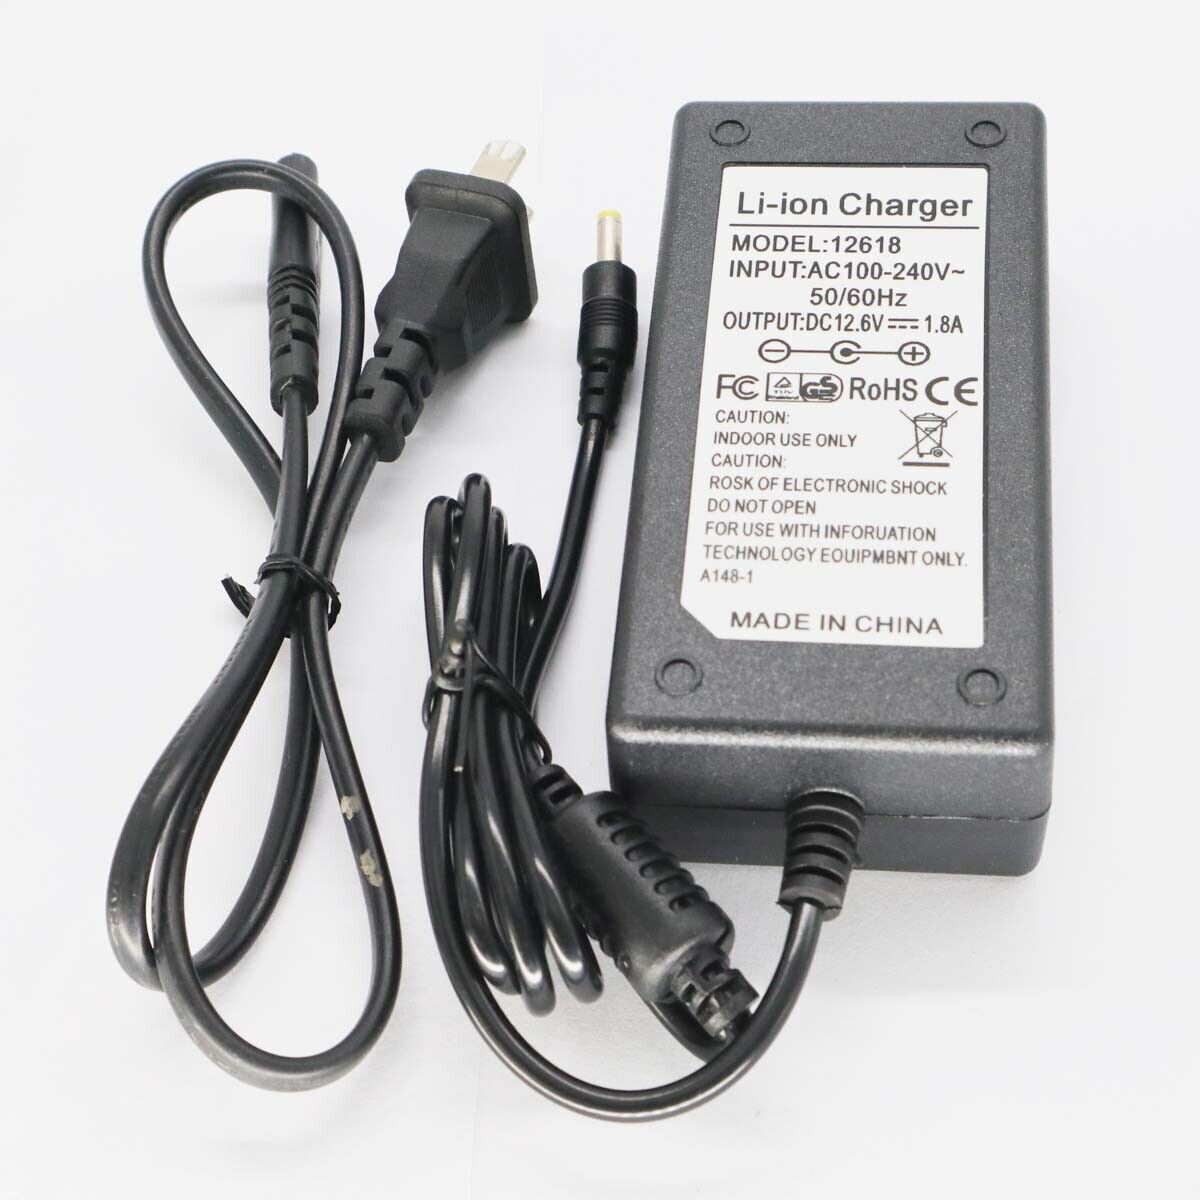 AC Adapter Charger for Korea INNO IFS15M IFS-15T IFS-15M+ Fiber Fusion Splicer Brand Unbranded Type AC/Standard Color B - Click Image to Close